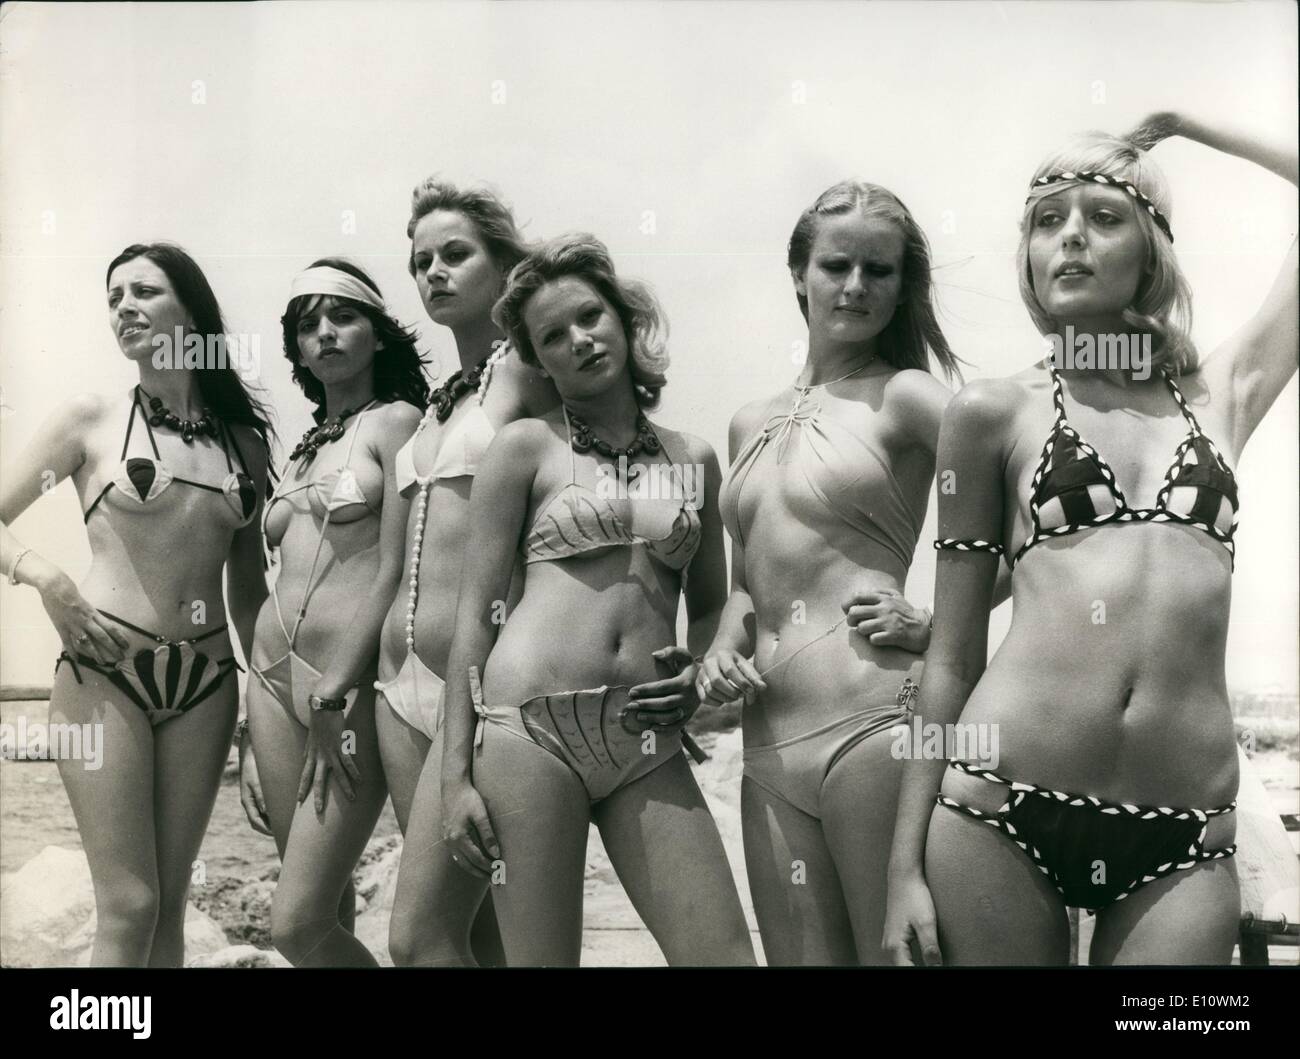 May 05, 1974 - The String is In. The Bikini? - well: Strung together with beads, ''shell'' patches, cording and neck loops in oddly geometric form, these Greek models were fished out of Aegean waters to show off what they call the Mermaid look - local version of the String which had its start on the beaches of Rio de Janeiro. The last word in sun and swim wear is swamping Greek beaches as the modern Aphrodite gradually forsakes the bikini. Stock Photo